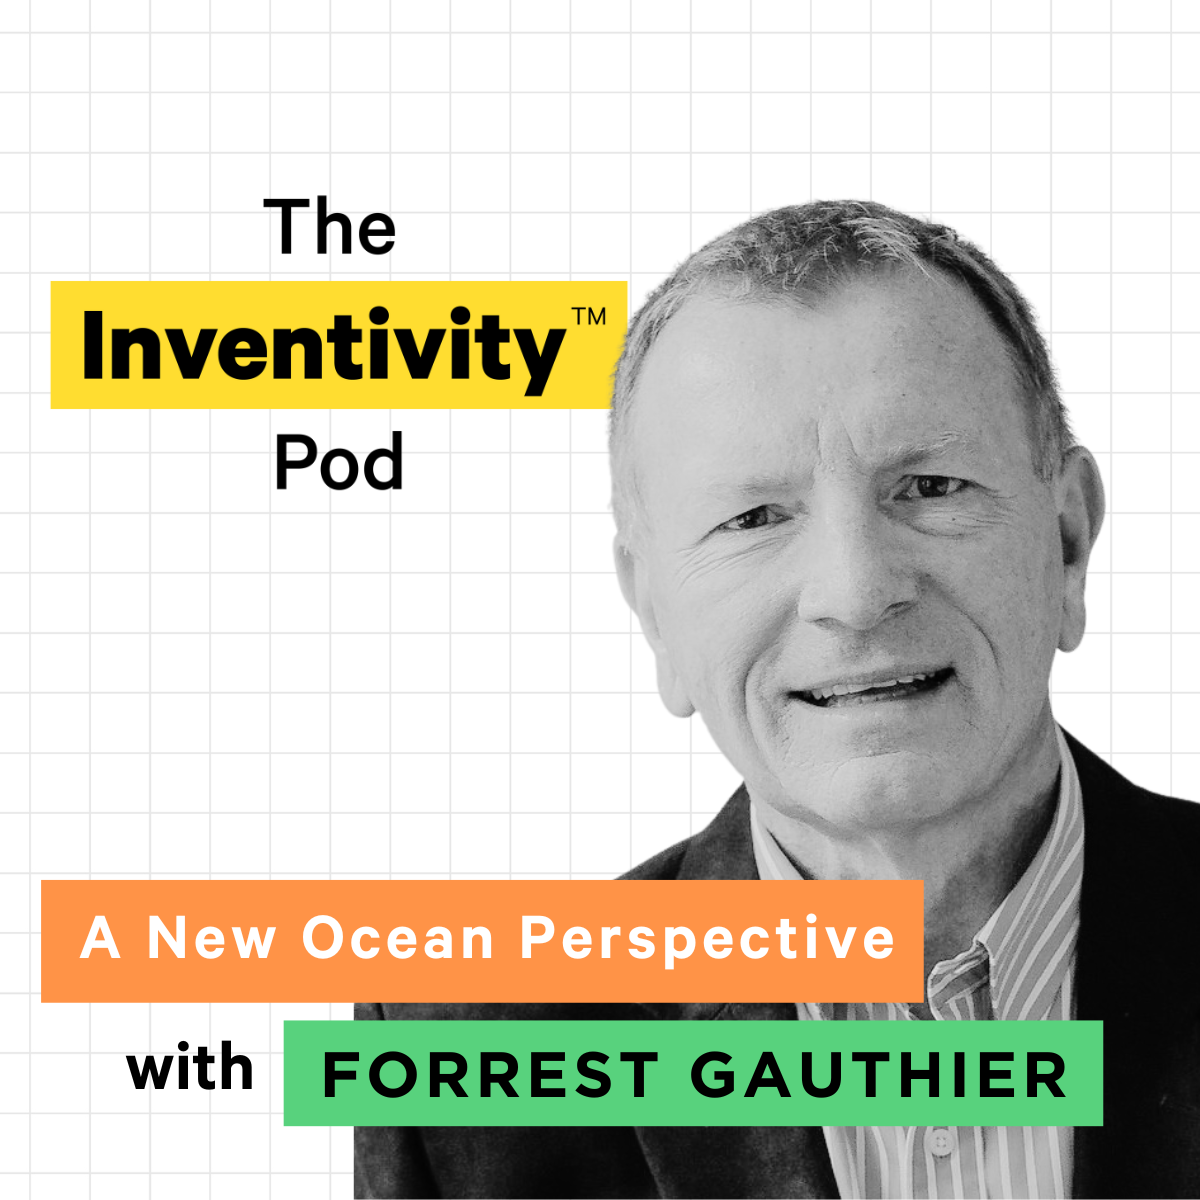 Forrest Gauthier and a New Ocean Perspective